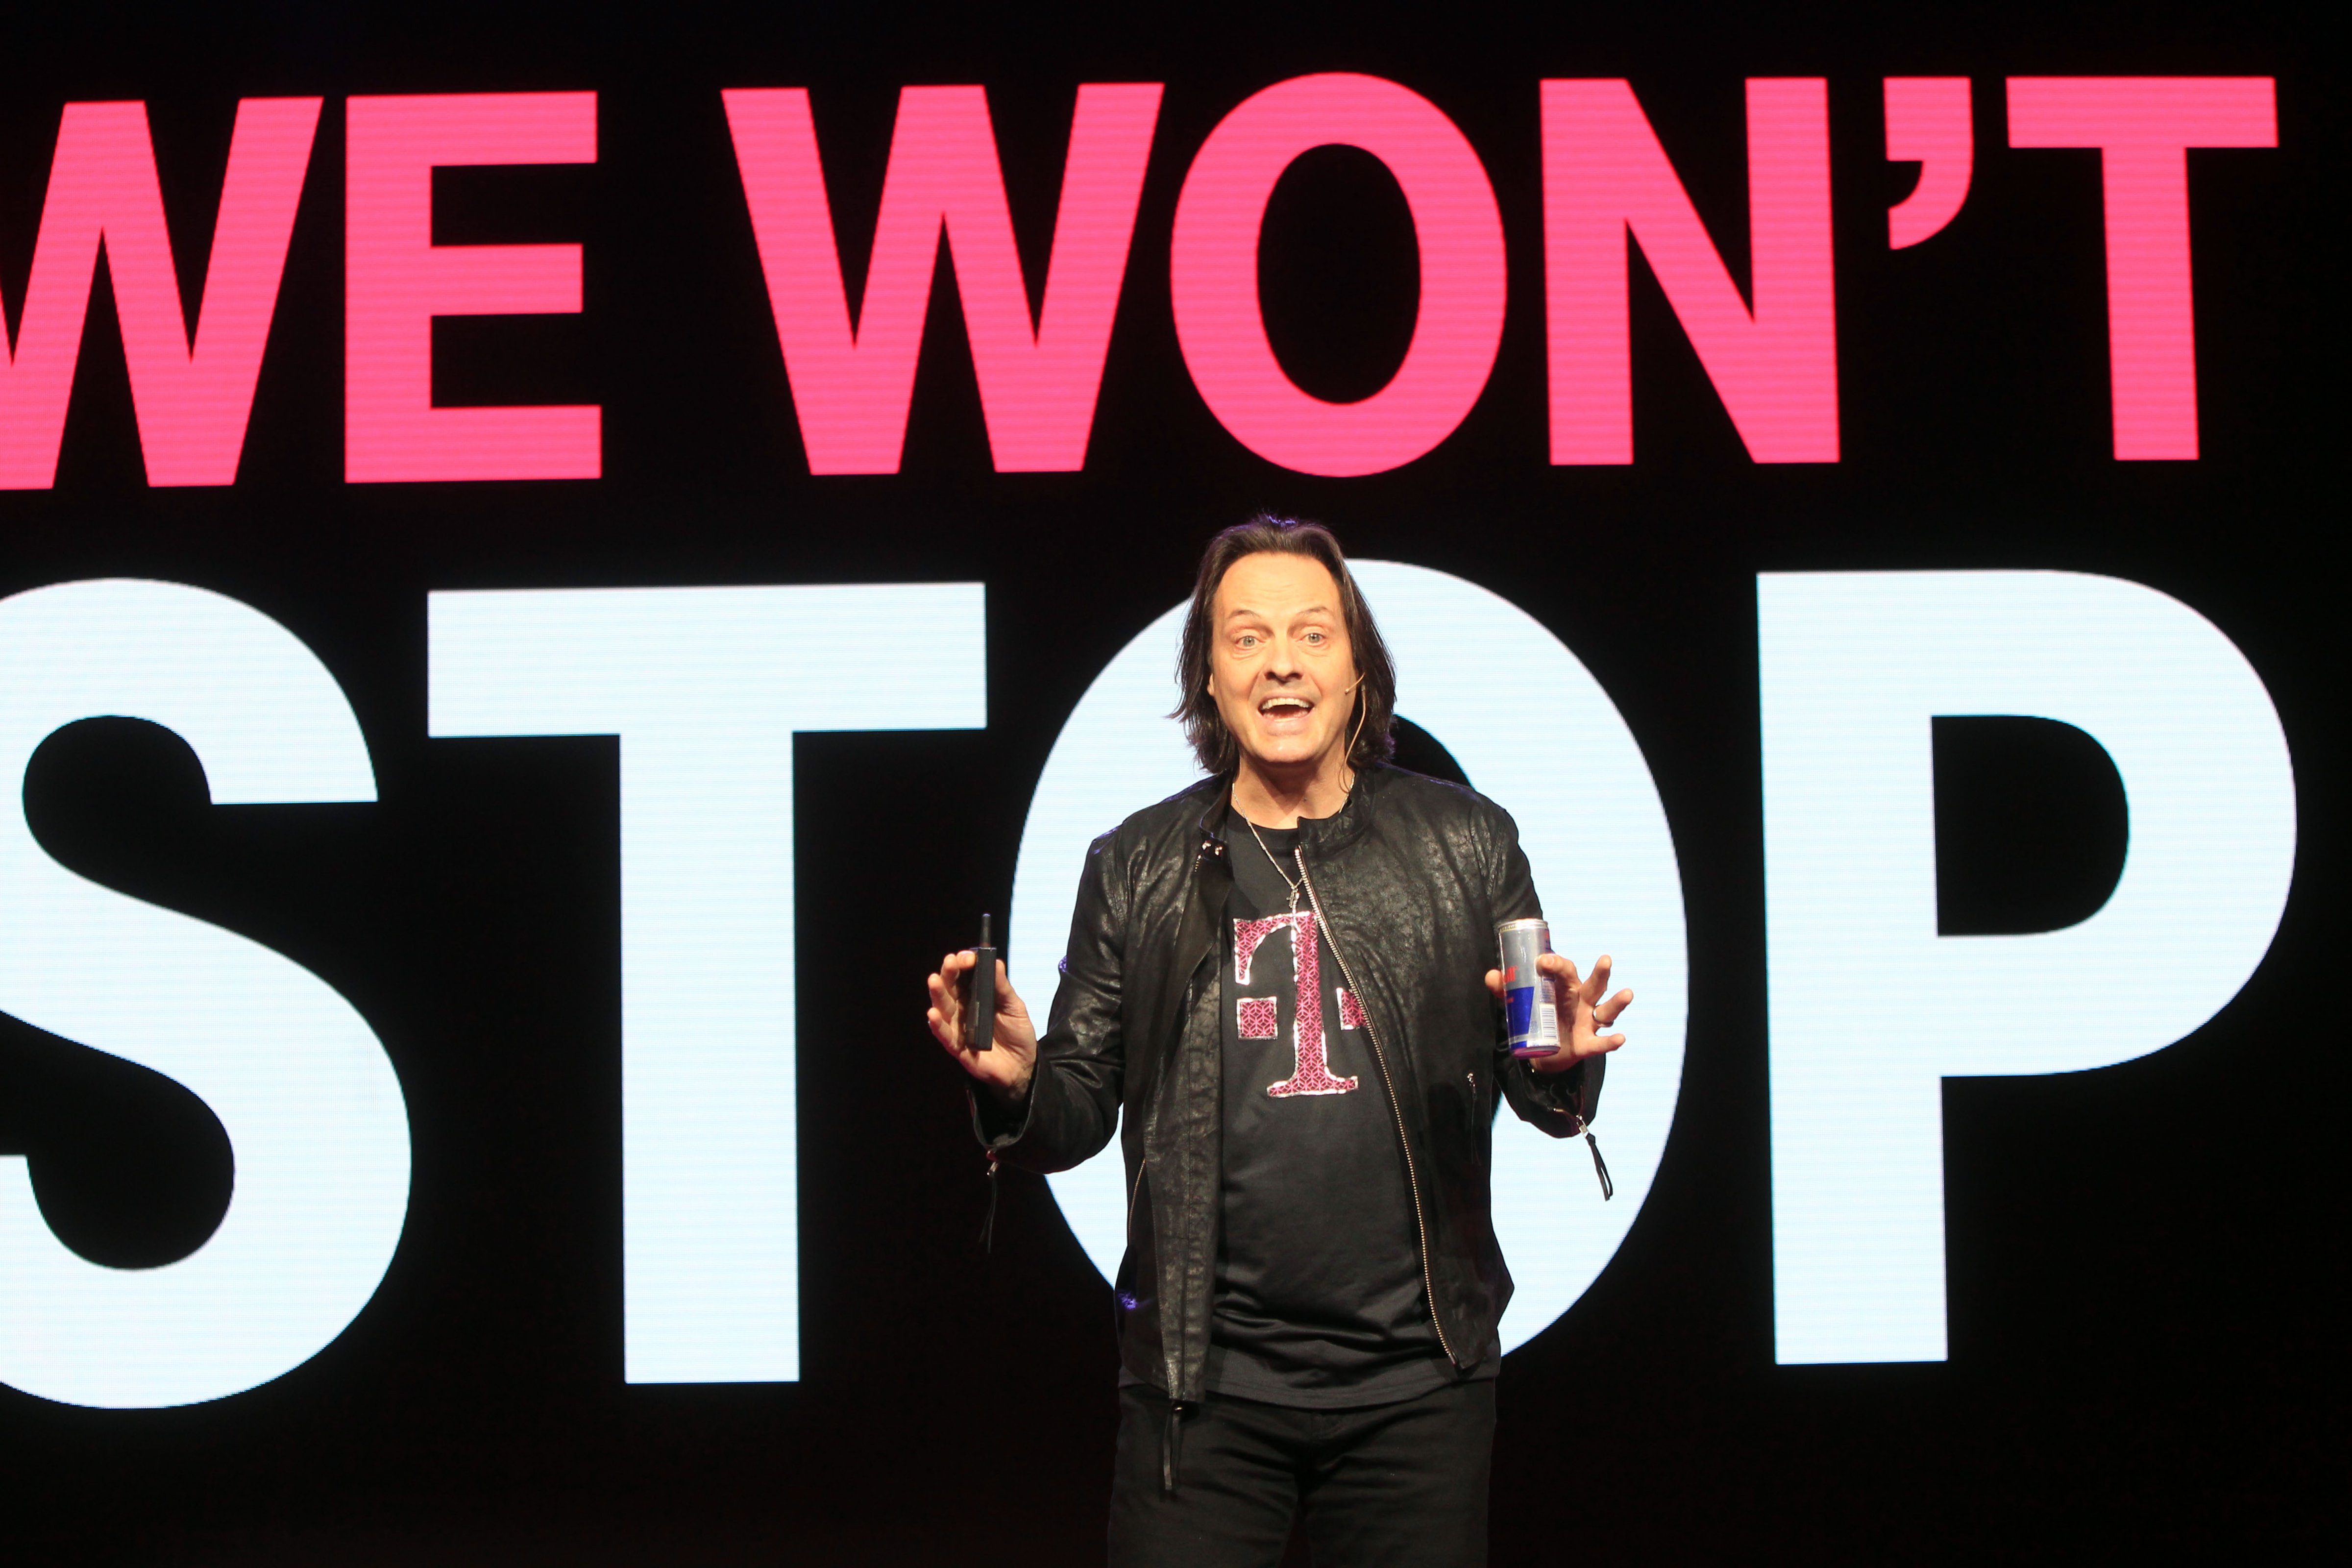 John Legere CEO of T-Mobile announces the company's new plans on March 18, 2015 in New York City. (Steve Sands)